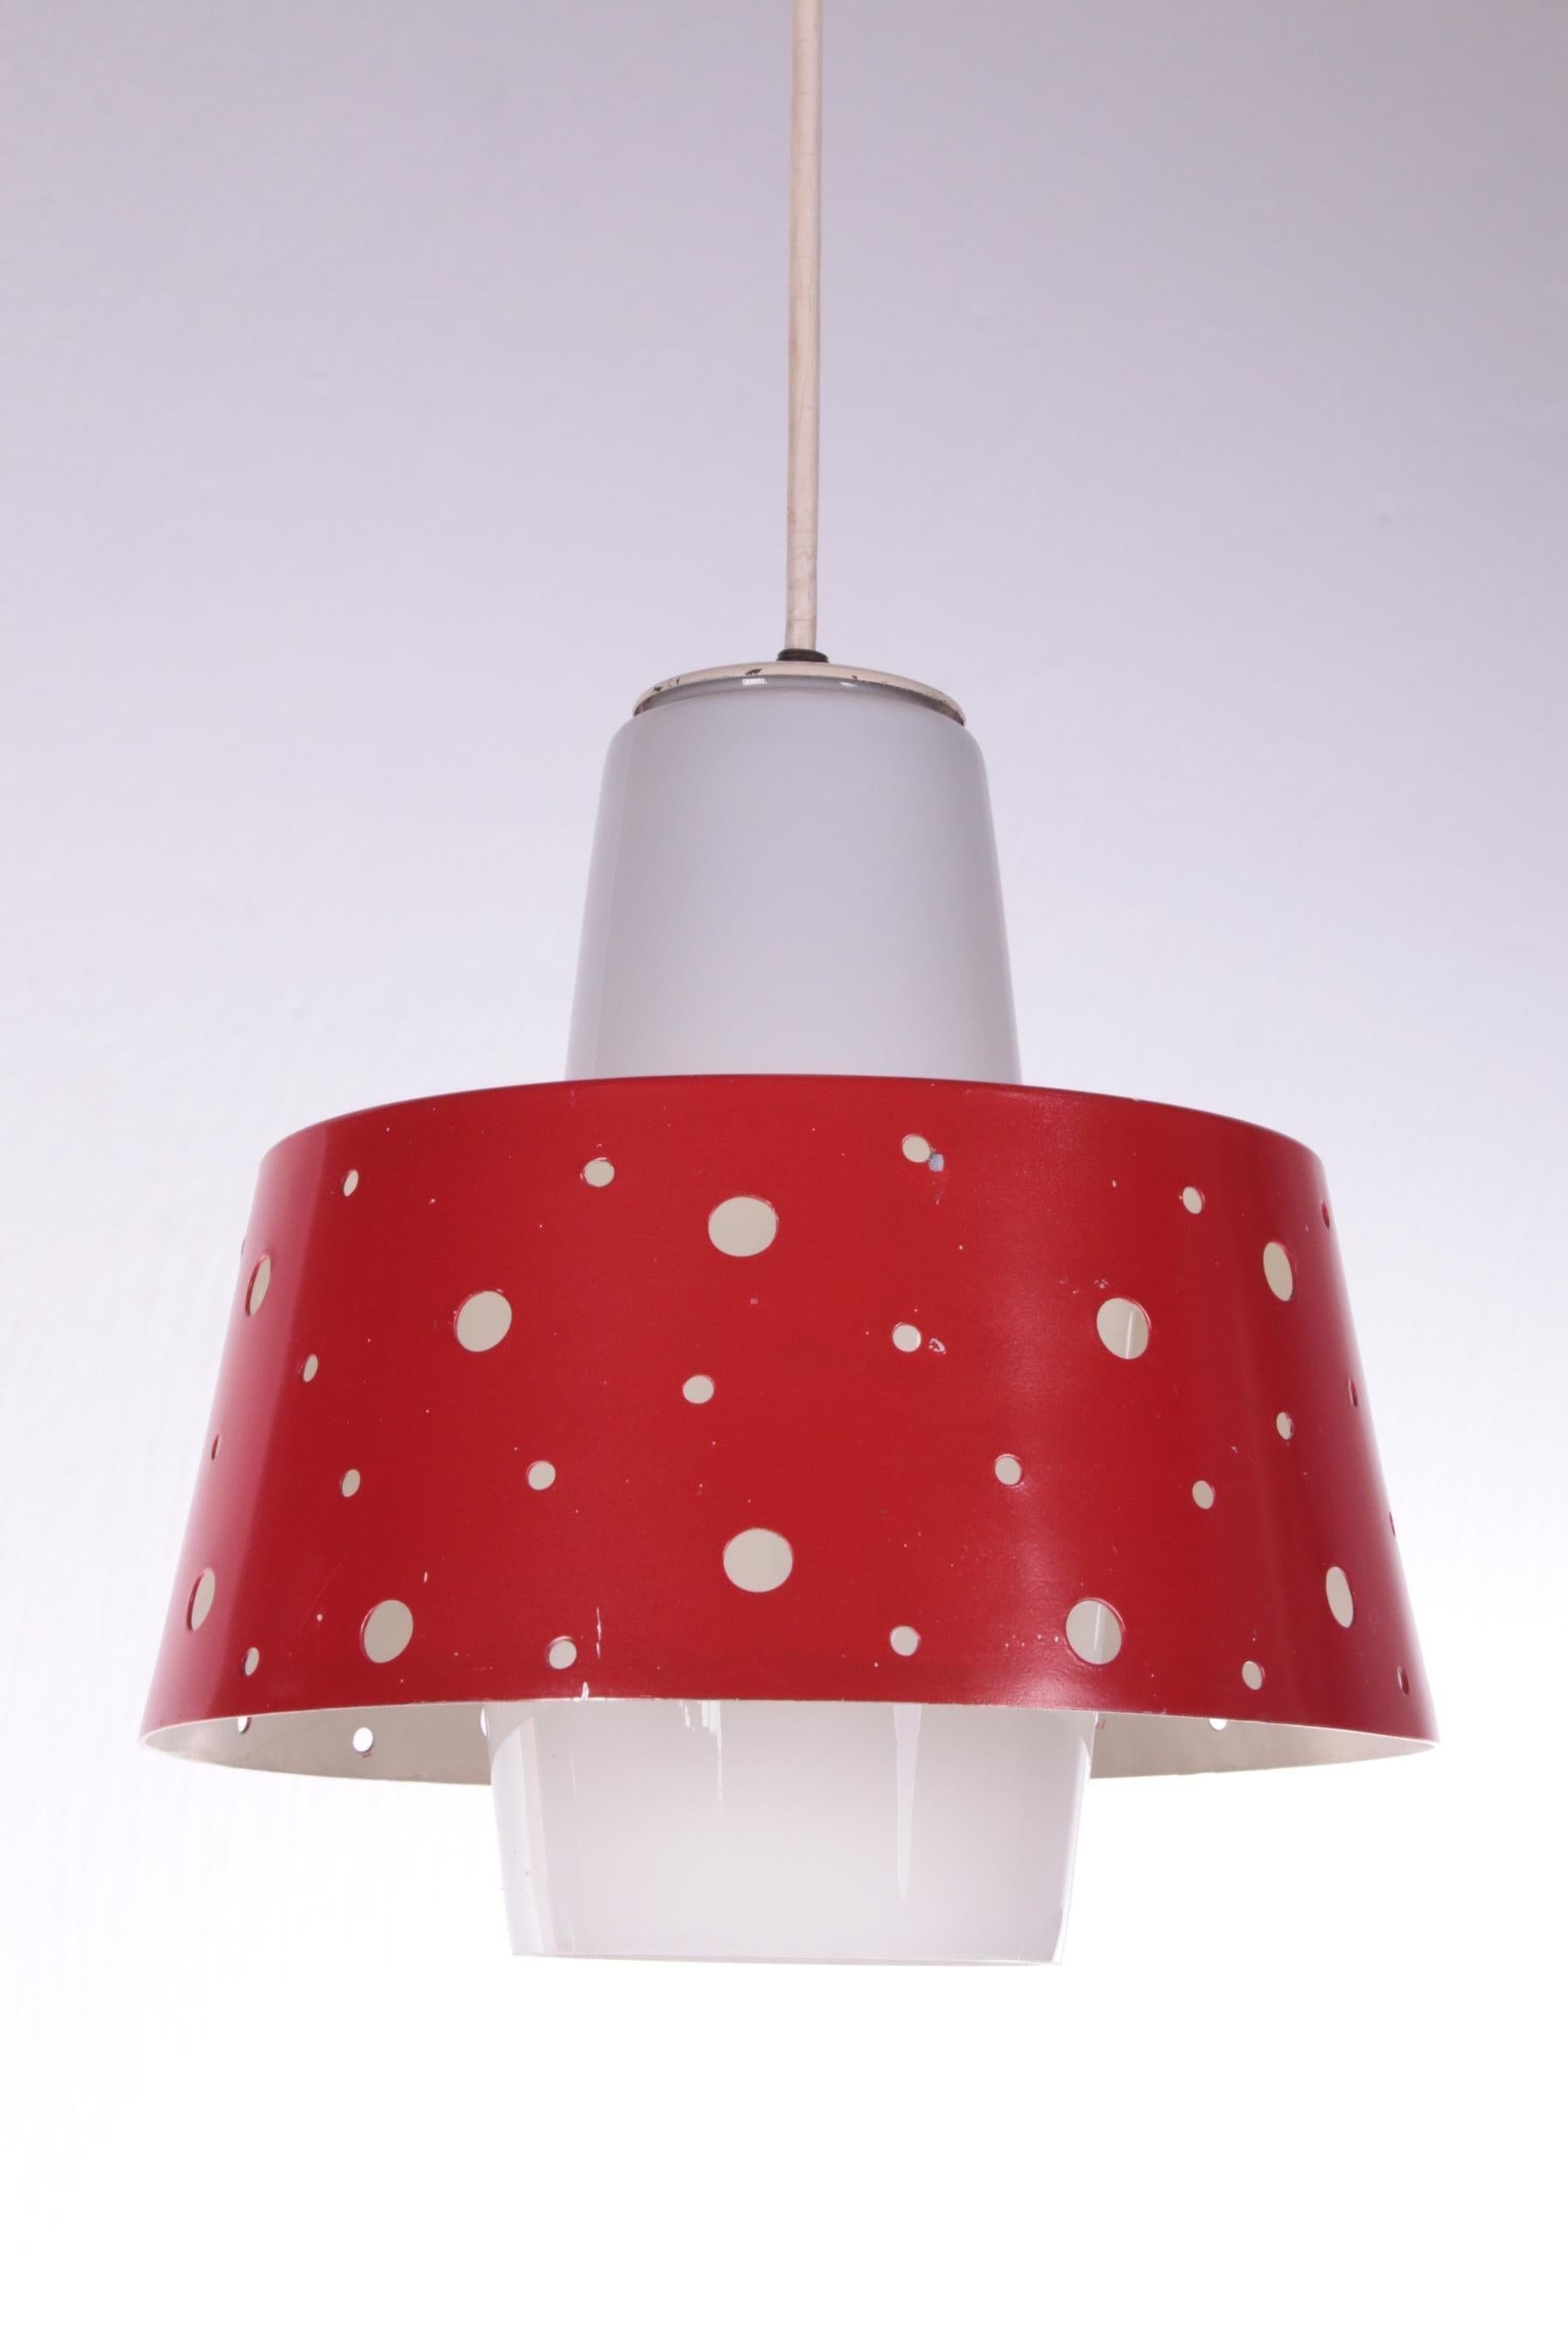 Vintage hanging lamp with glass and metal 1950s


This is a hanging lamp which is made of beautiful white glass with a red matal red border around it with round holes.

The lamp is very similar to the 1950s lamps by Paavo Tynell from